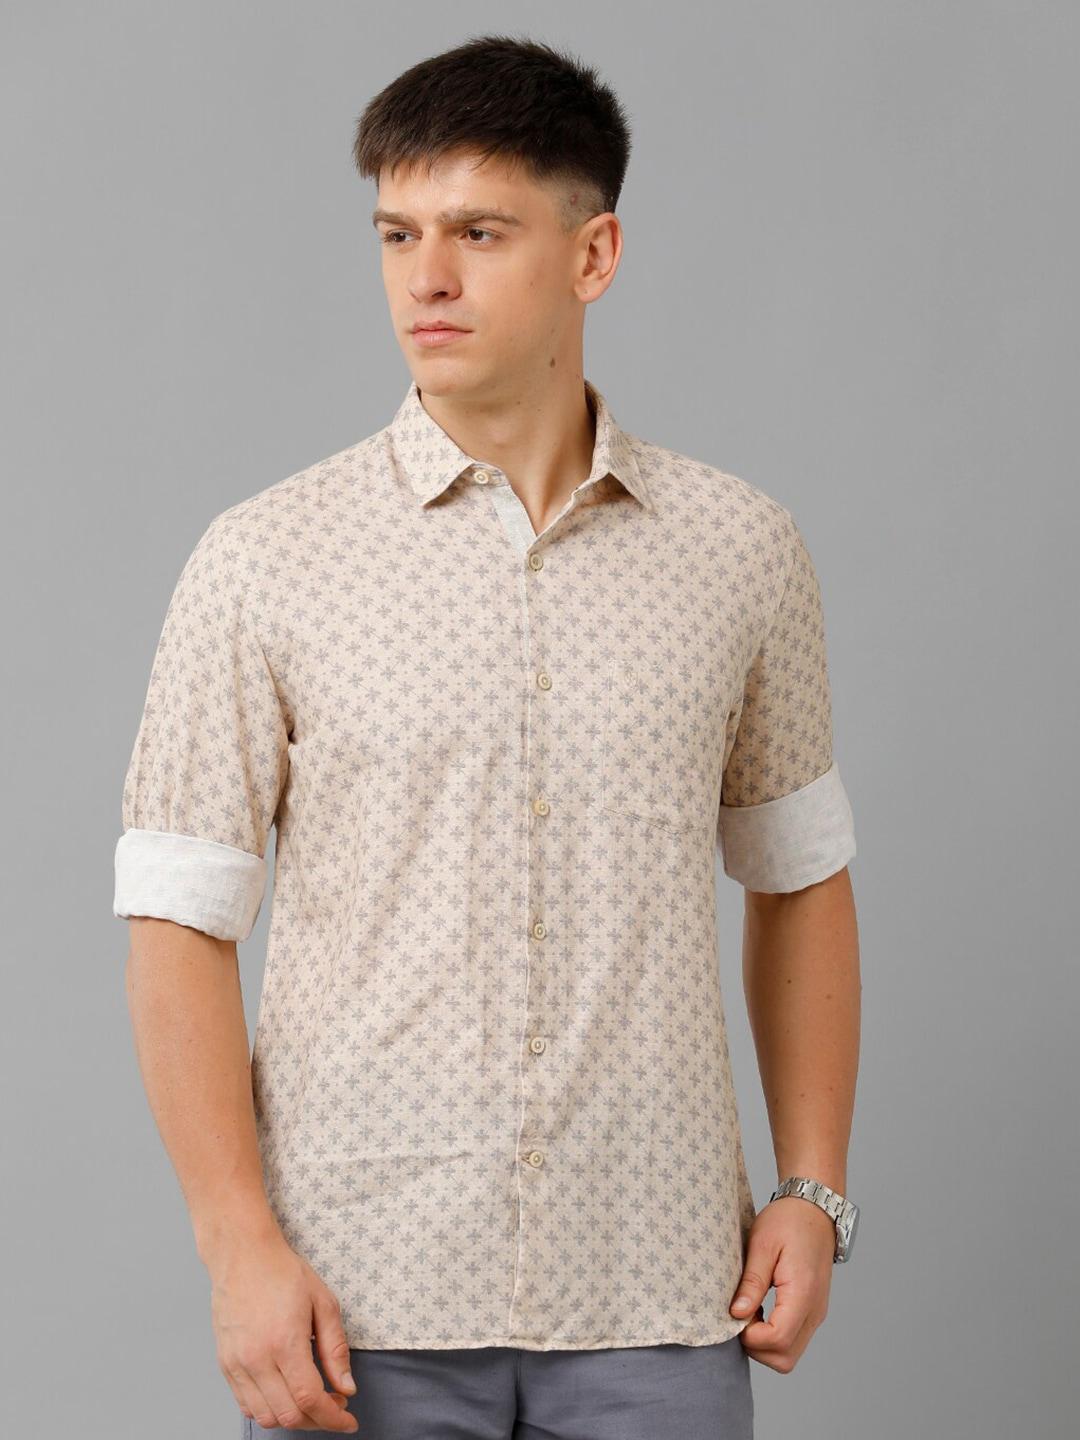 linen-club-floral-printed-opaque-casual-pure-linen-shirt